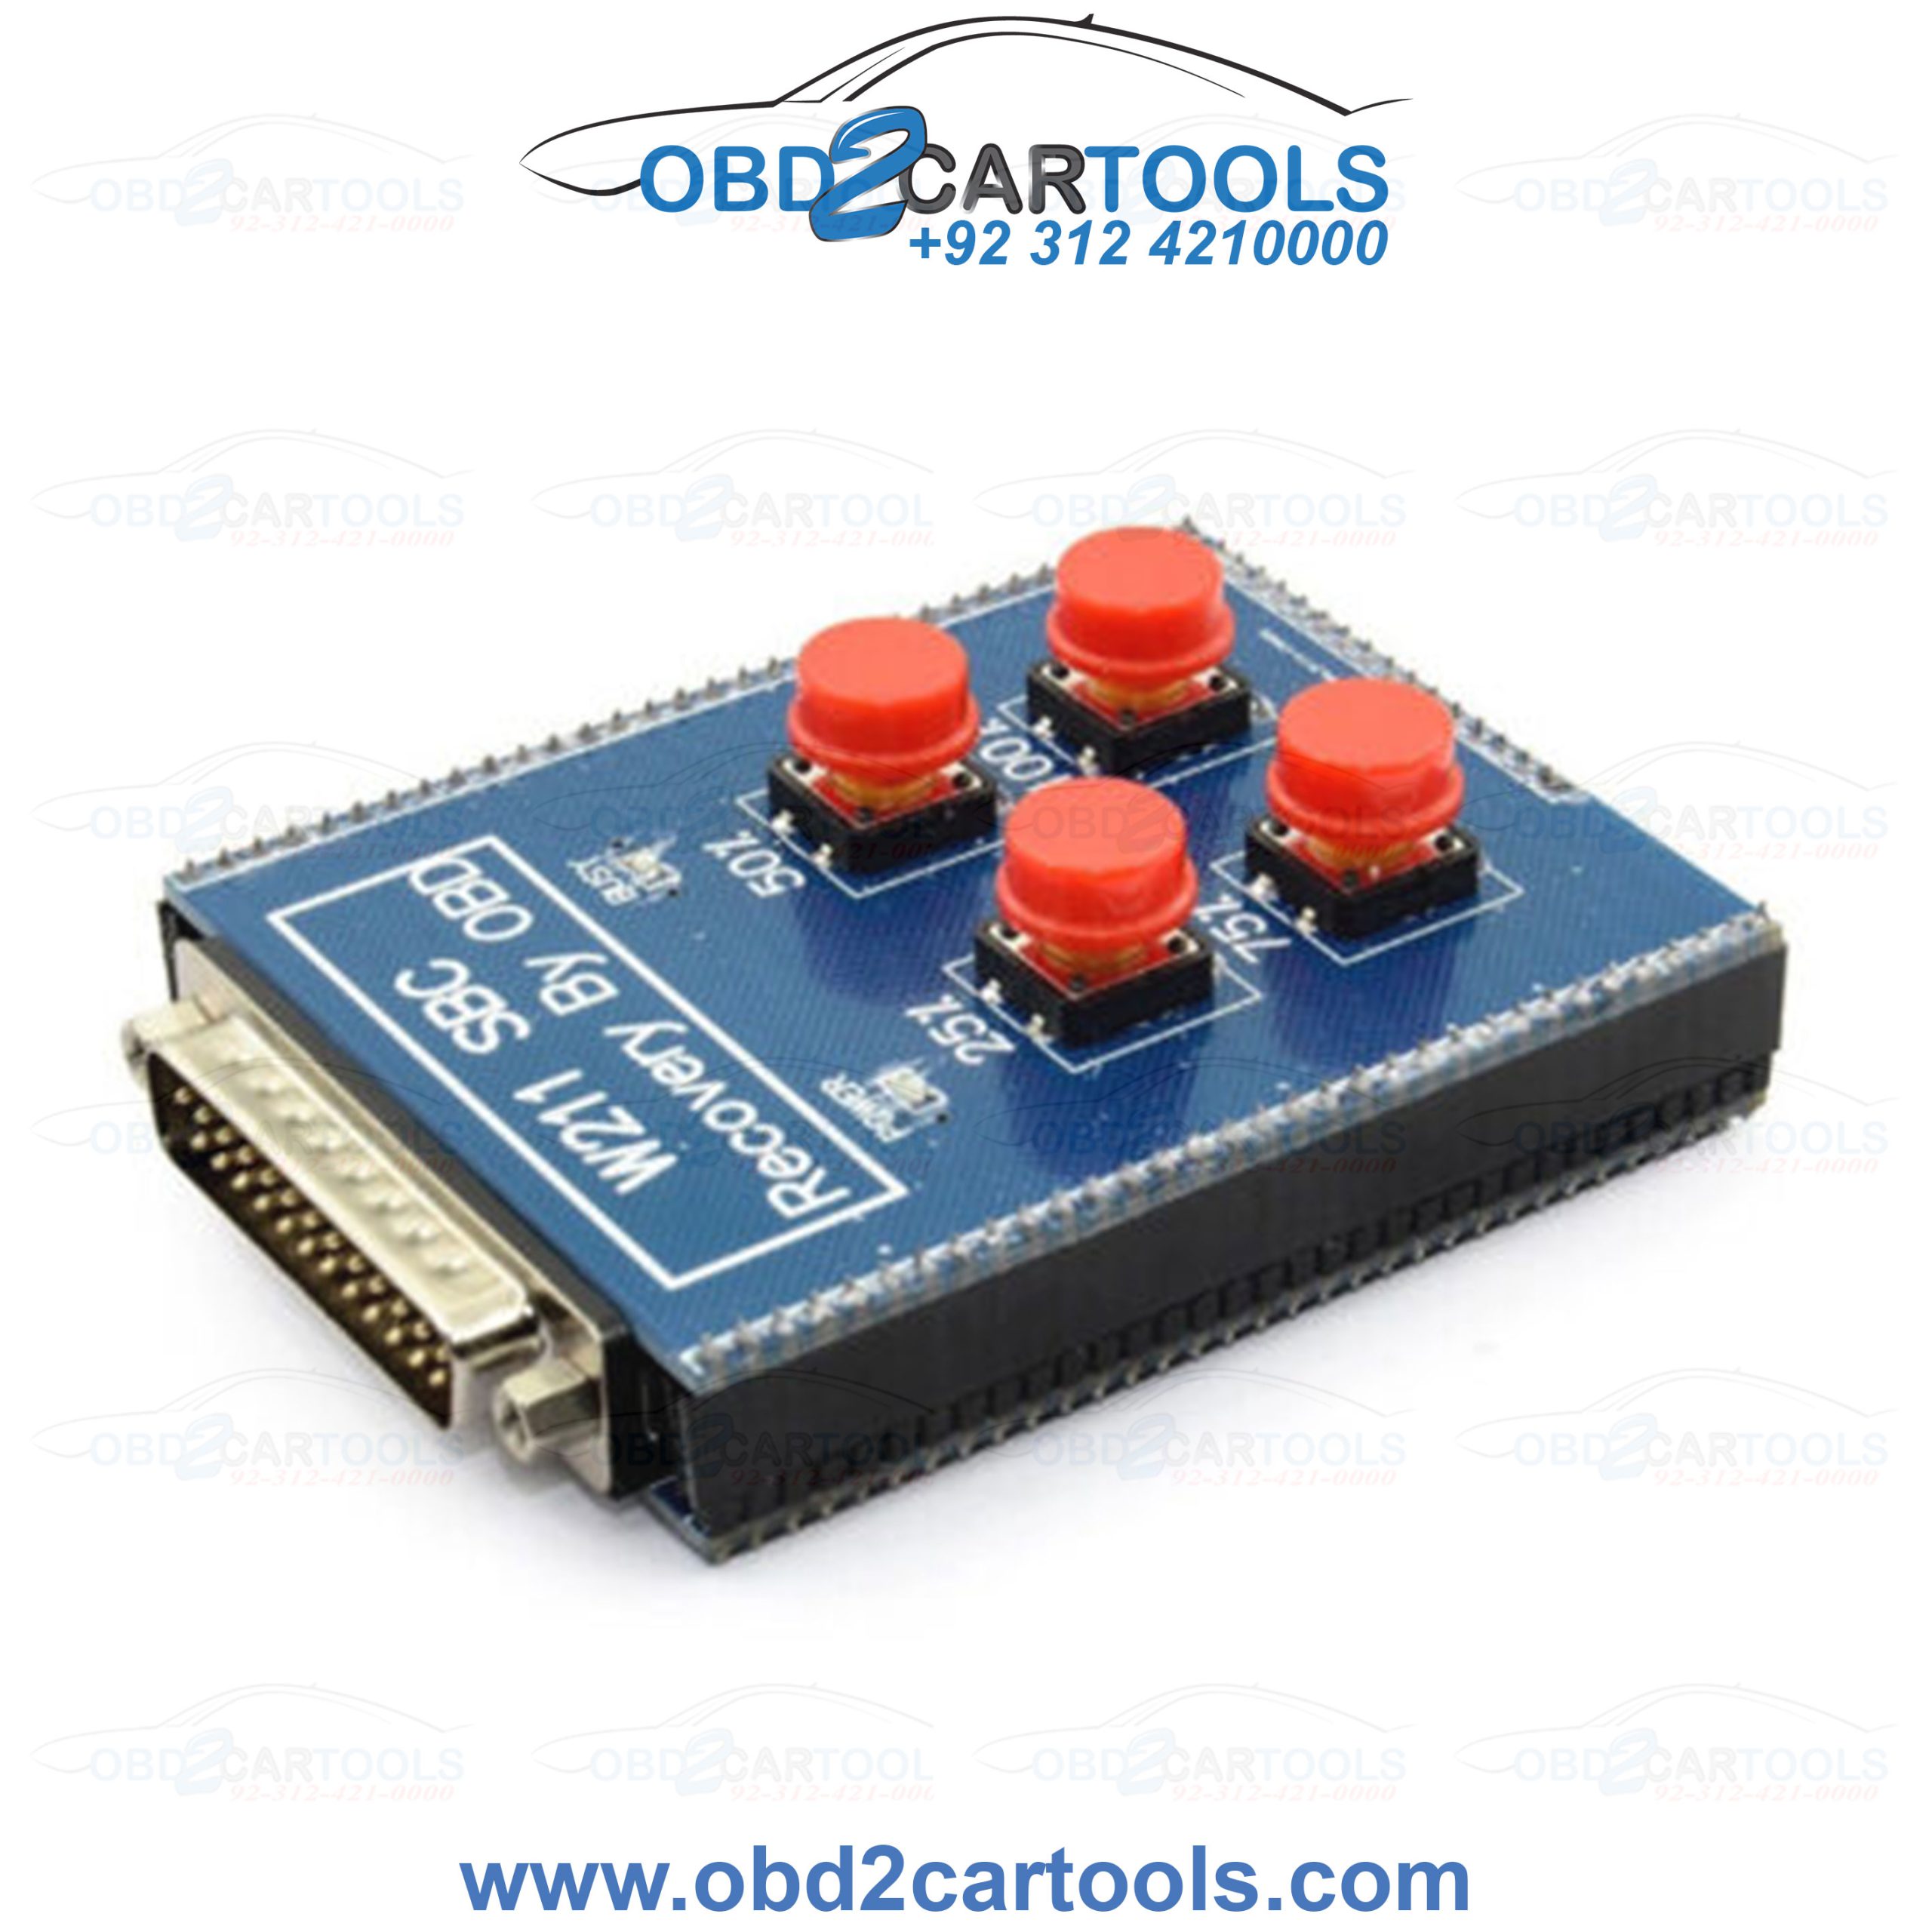 Product image for W211/R230 ABS Reset Tool for Mer-cedes for Be-nz OBD SBC Reset Tool